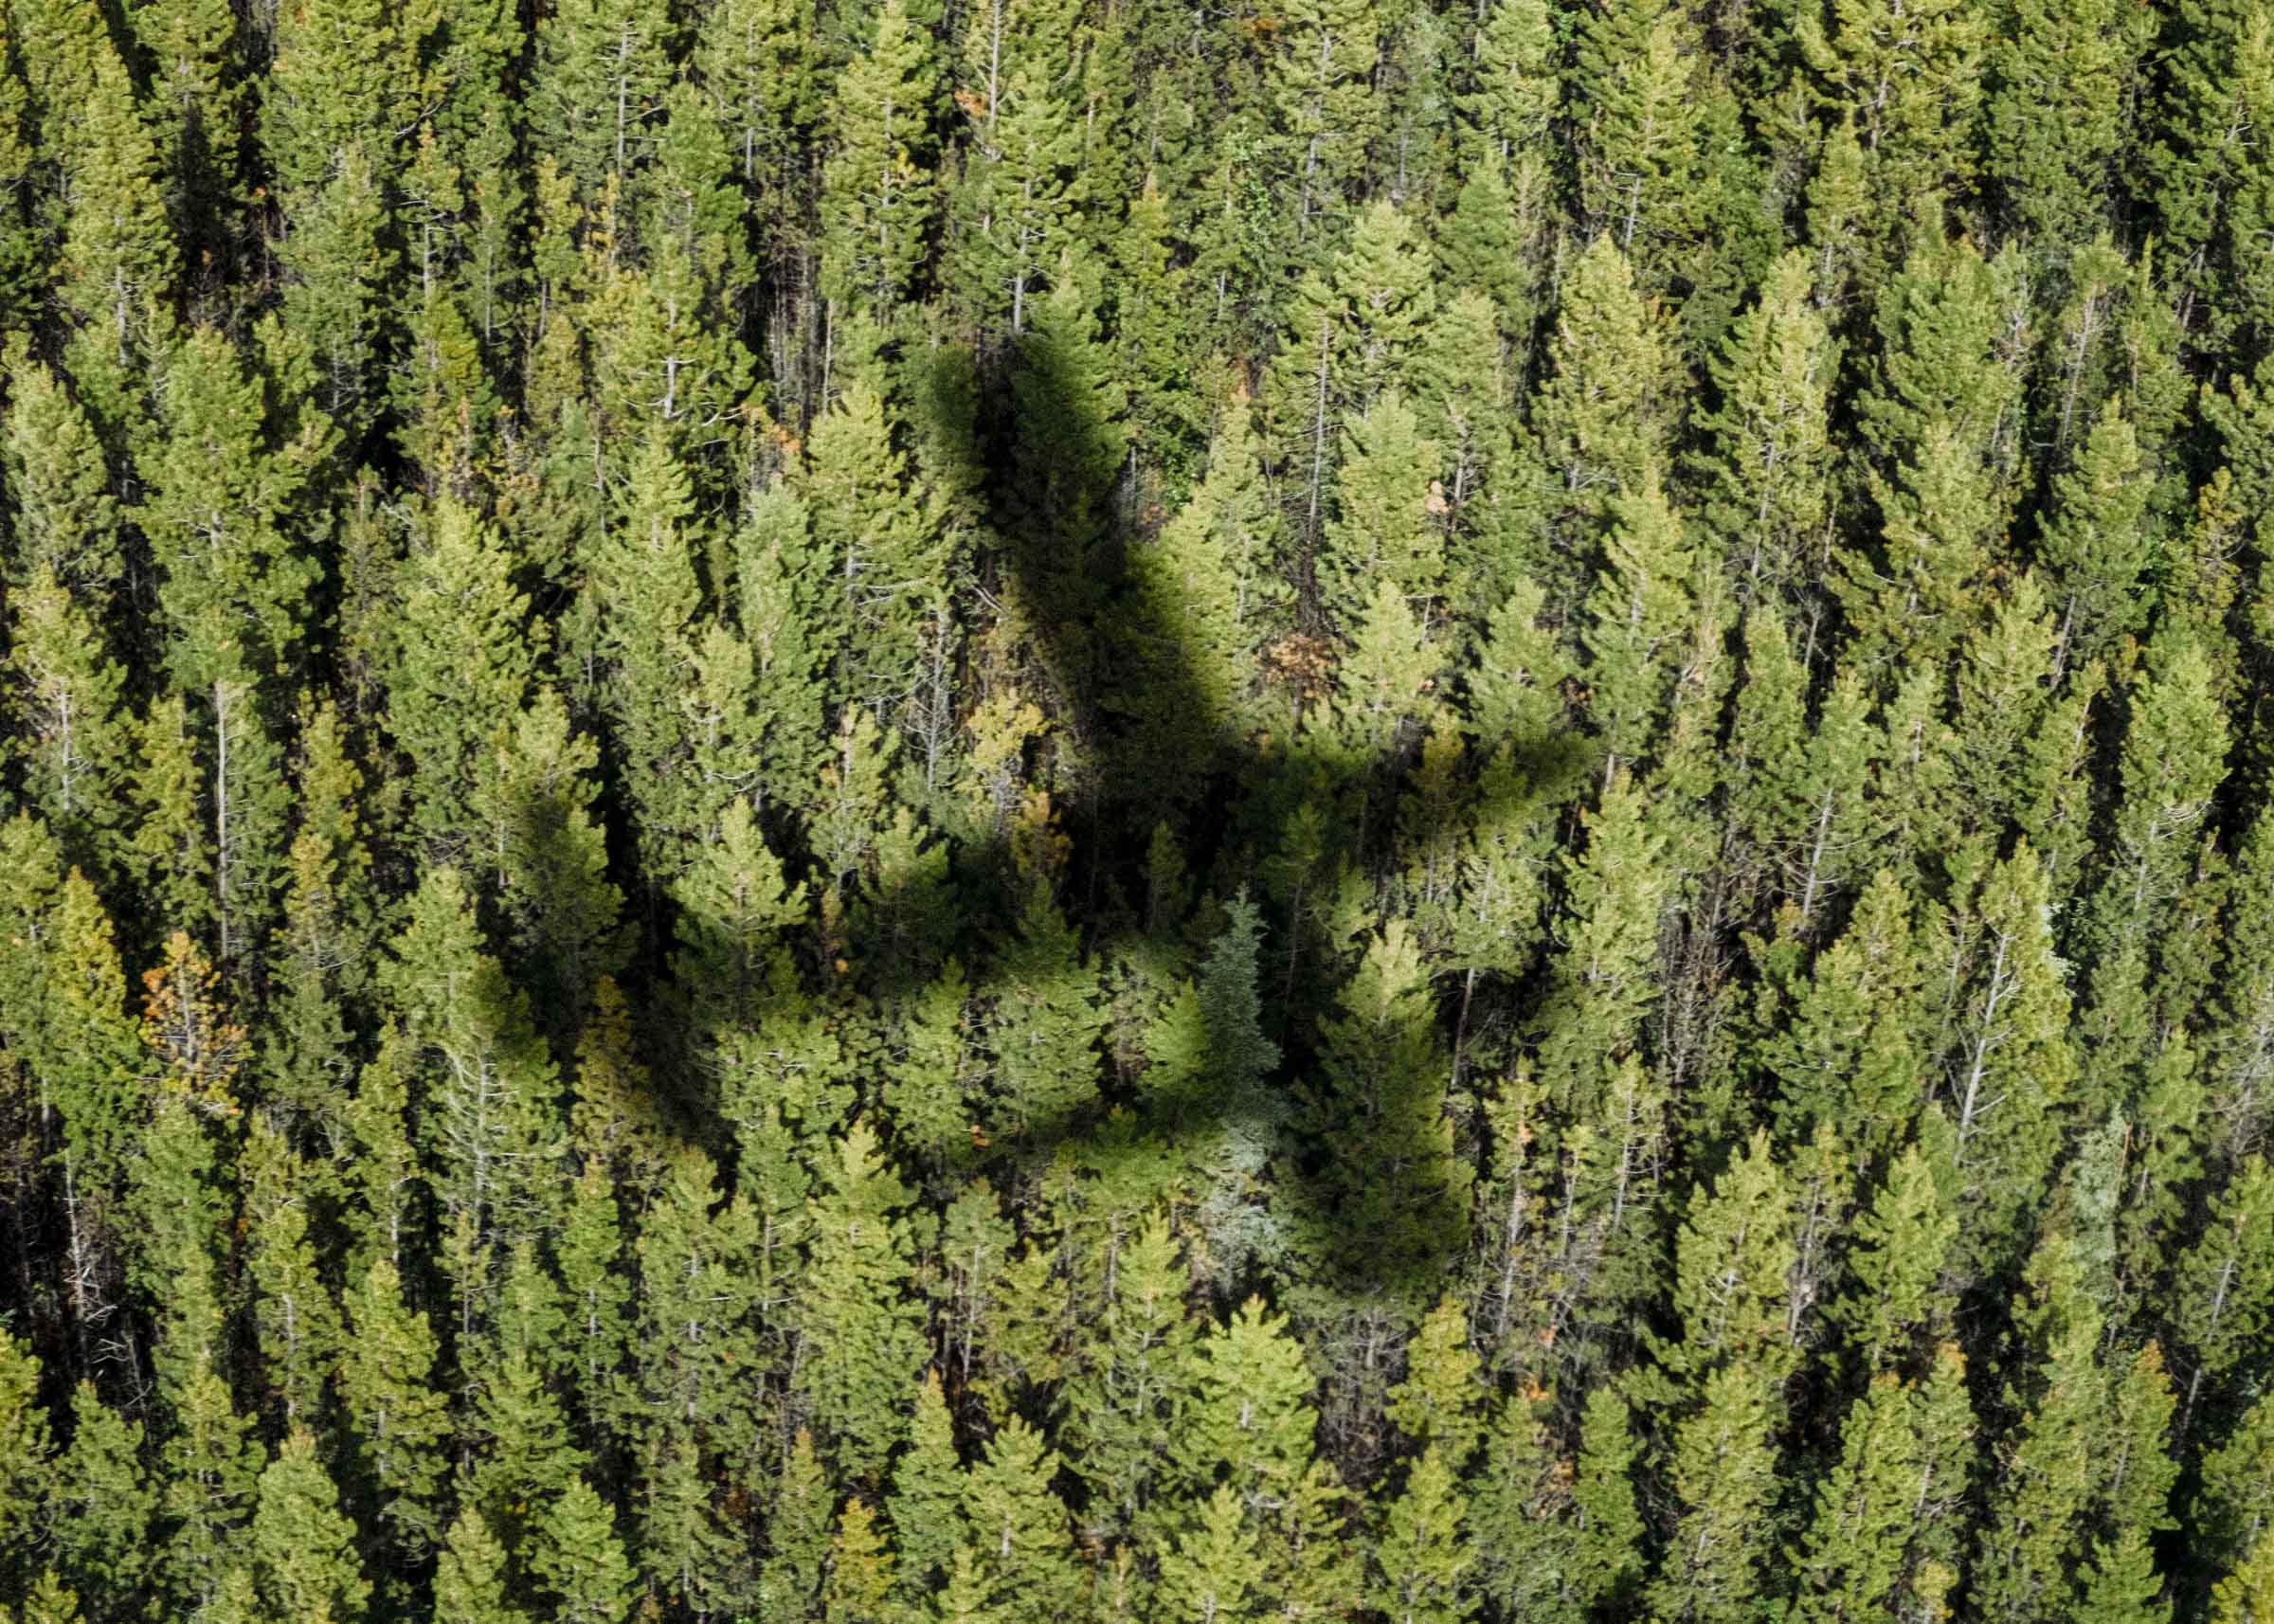 Flying over the pine forests